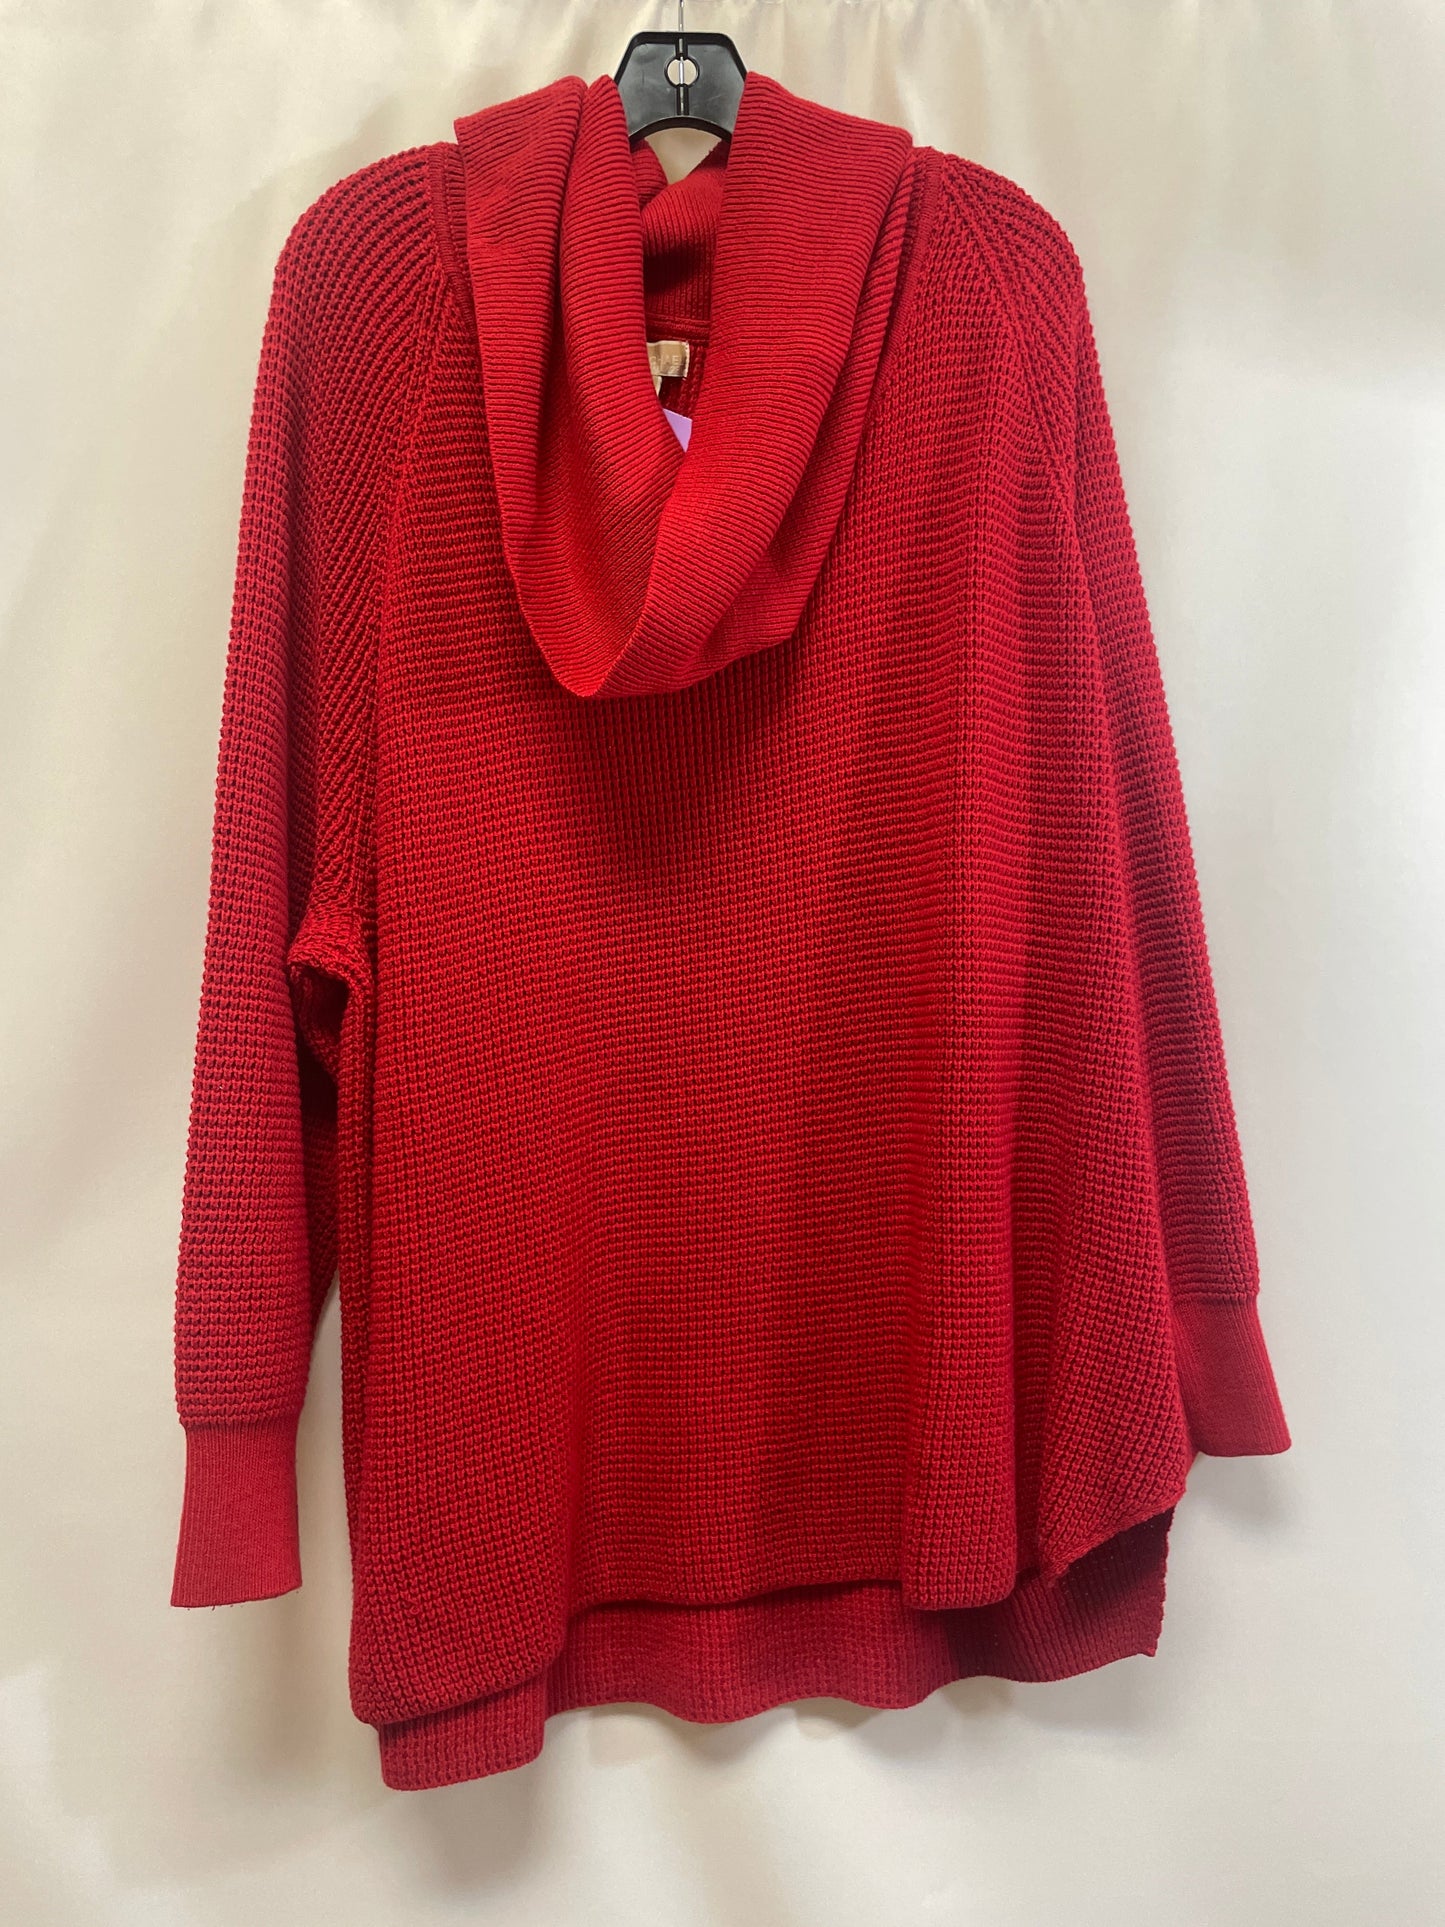 Red Sweater Michael By Michael Kors, Size 3x